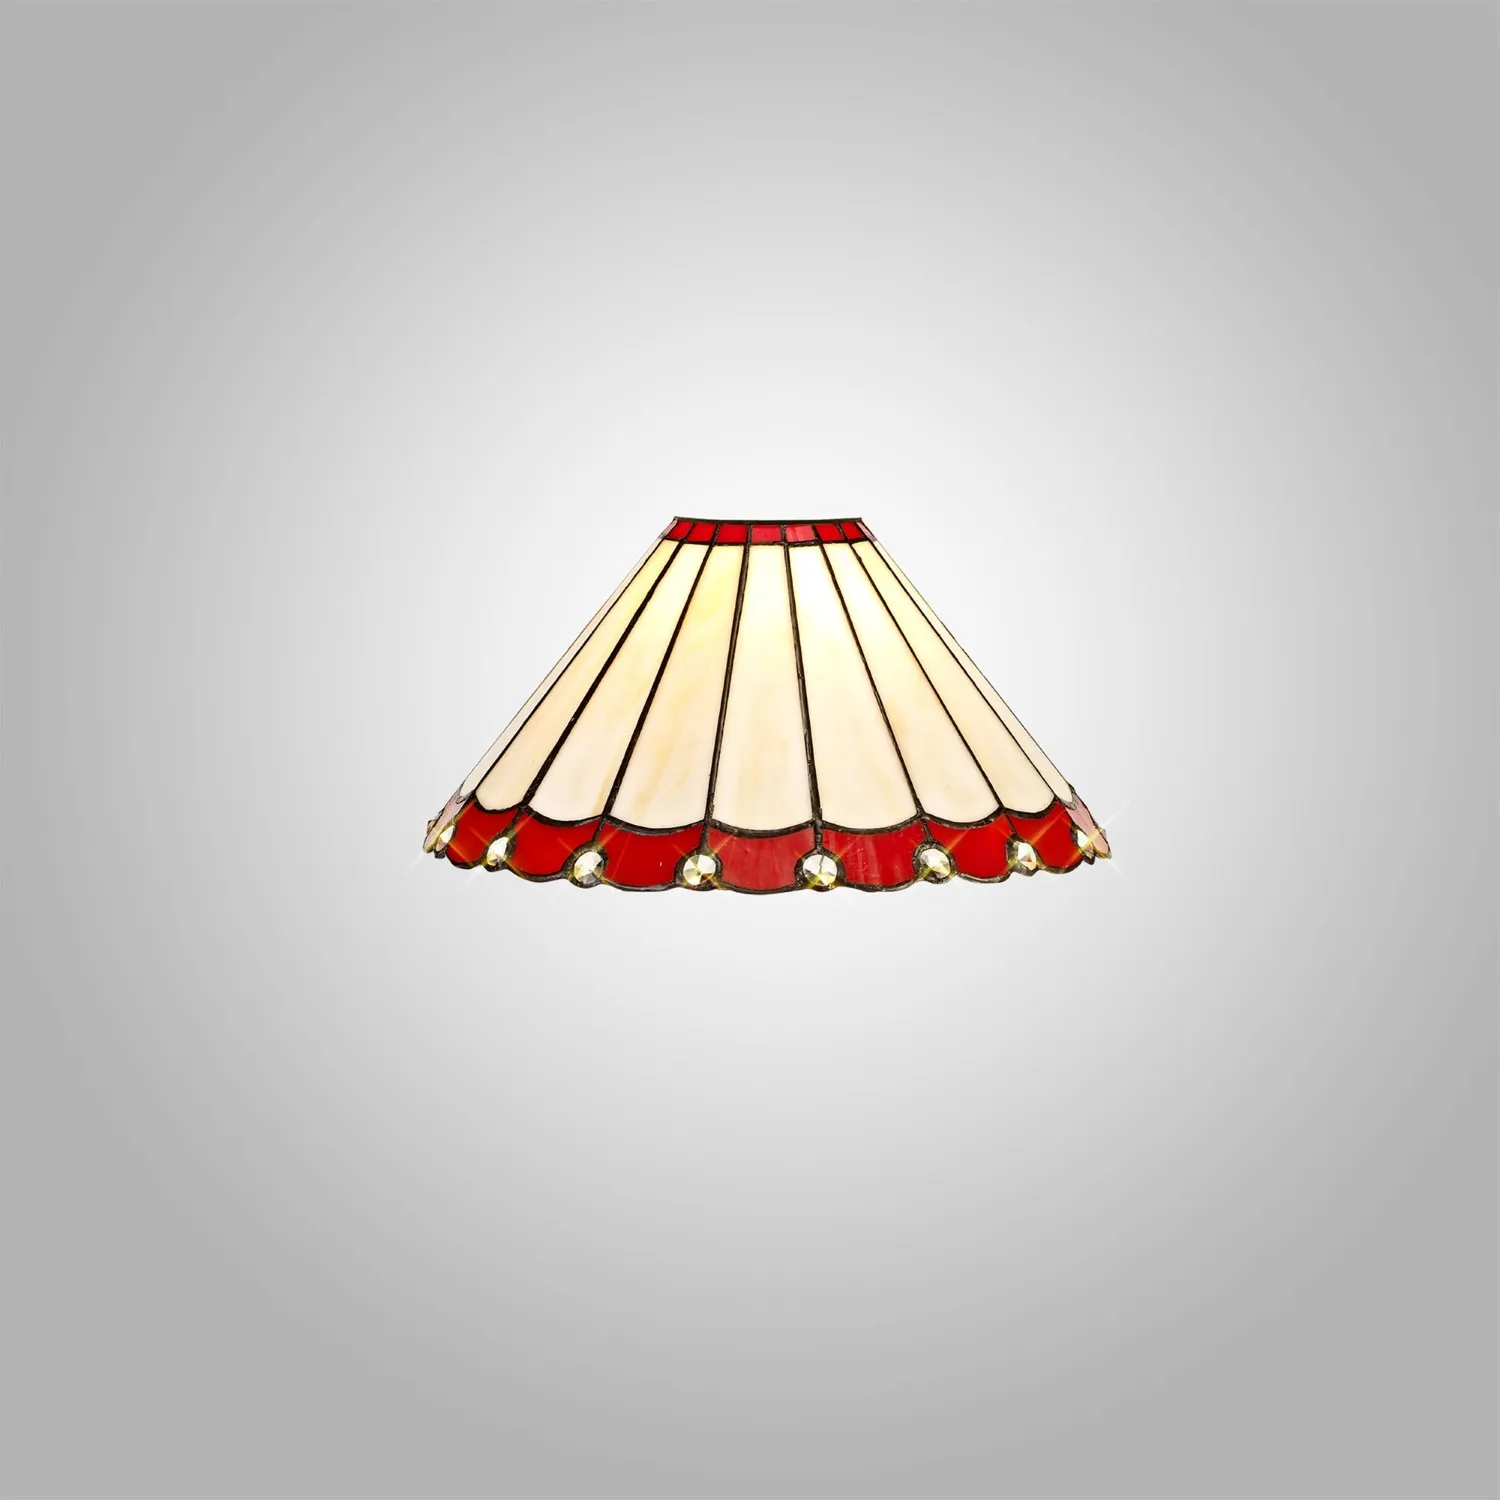 Ware Tiffany 30cm Non Electric Shade, Red Cream Crystal. Suitable For E27 or B22 Pendants